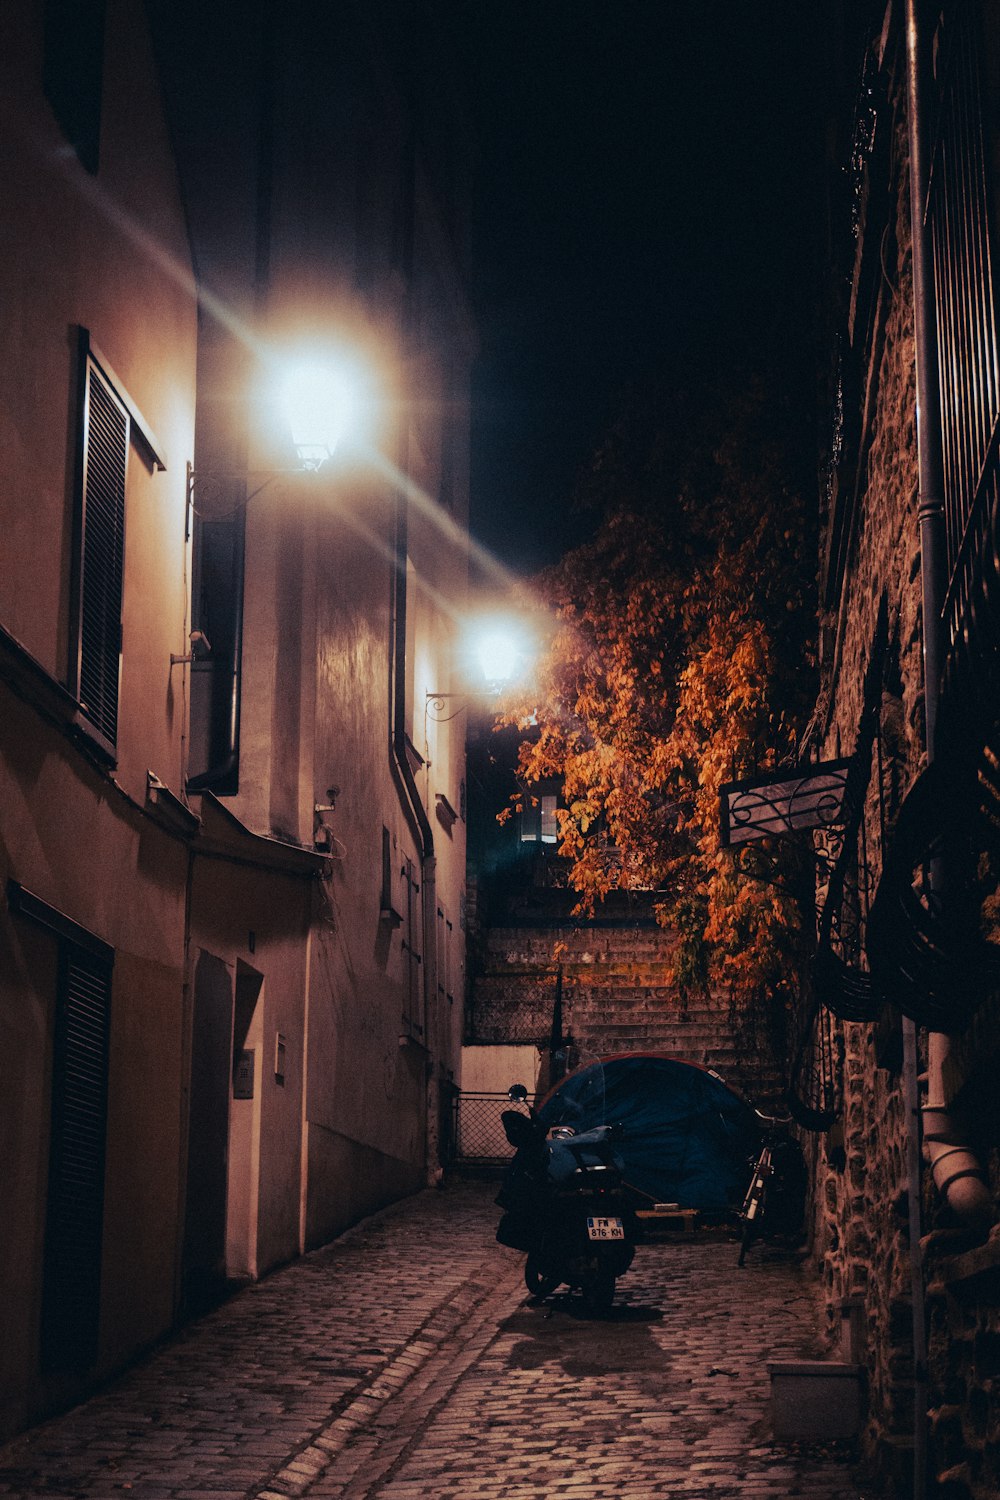 a motorcycle parked on a cobblestone street at night